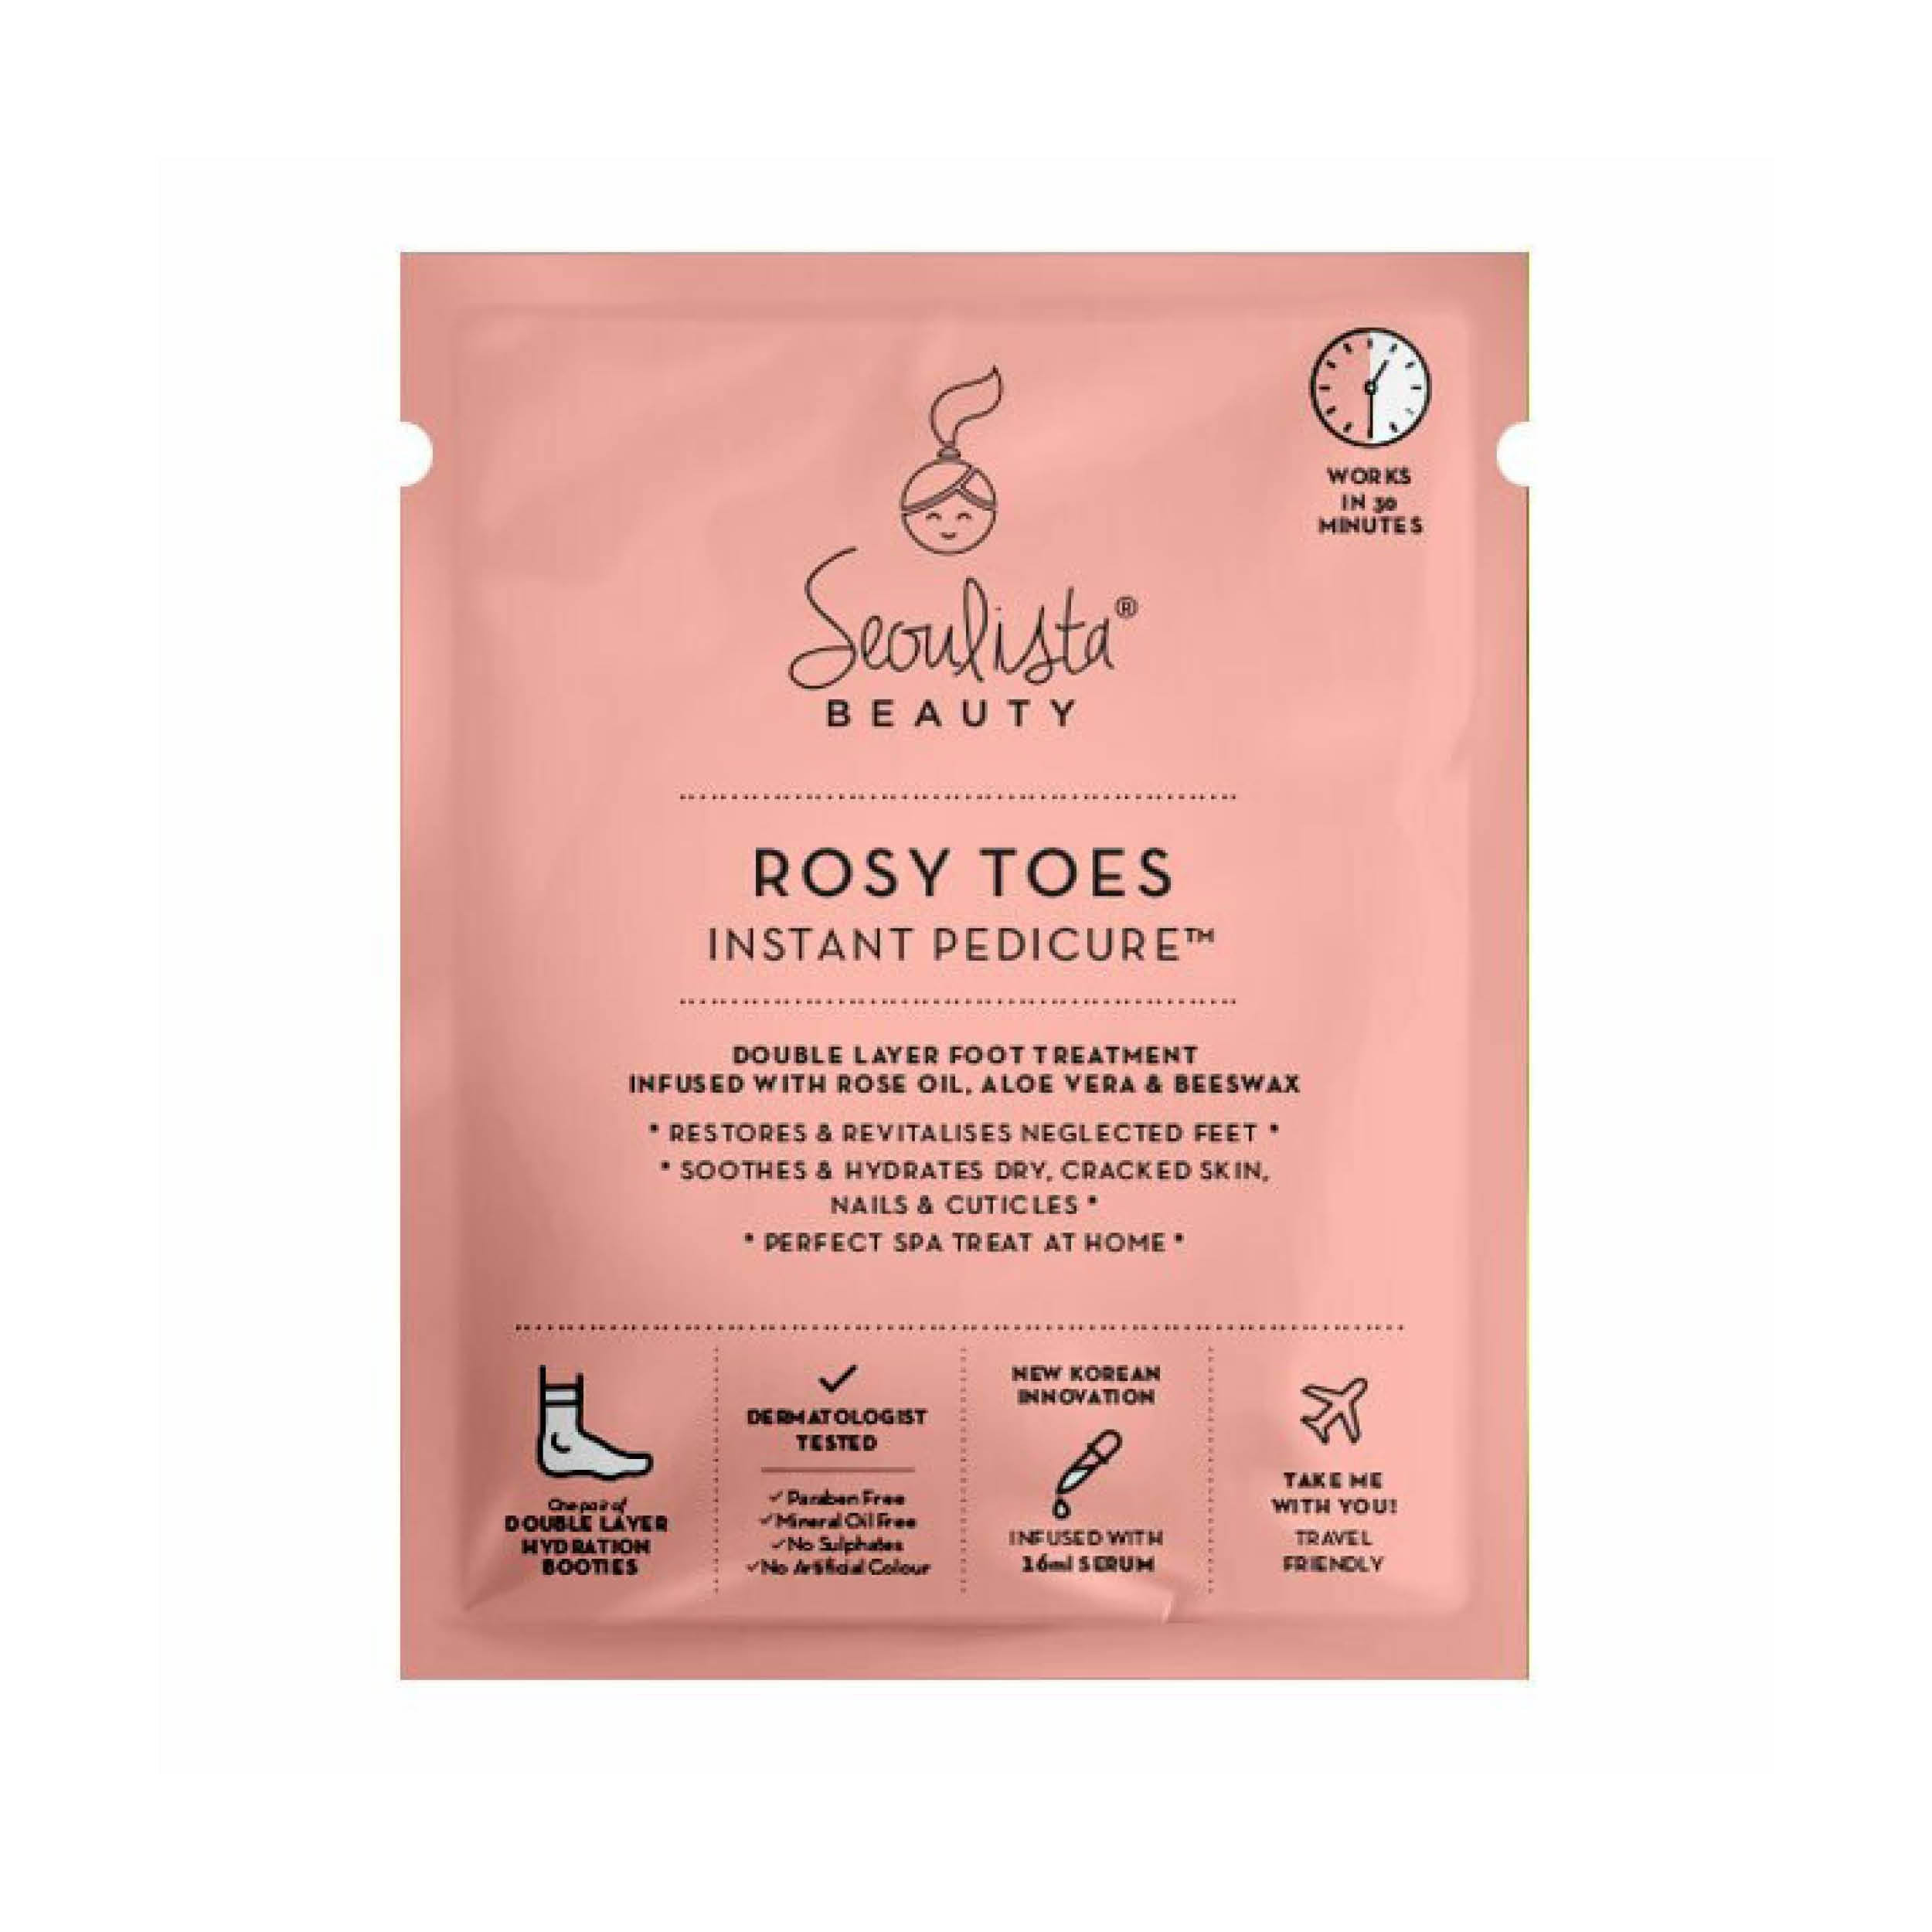 Seoulista Beauty Rosy Toes Instant Pedicure Foot Mask